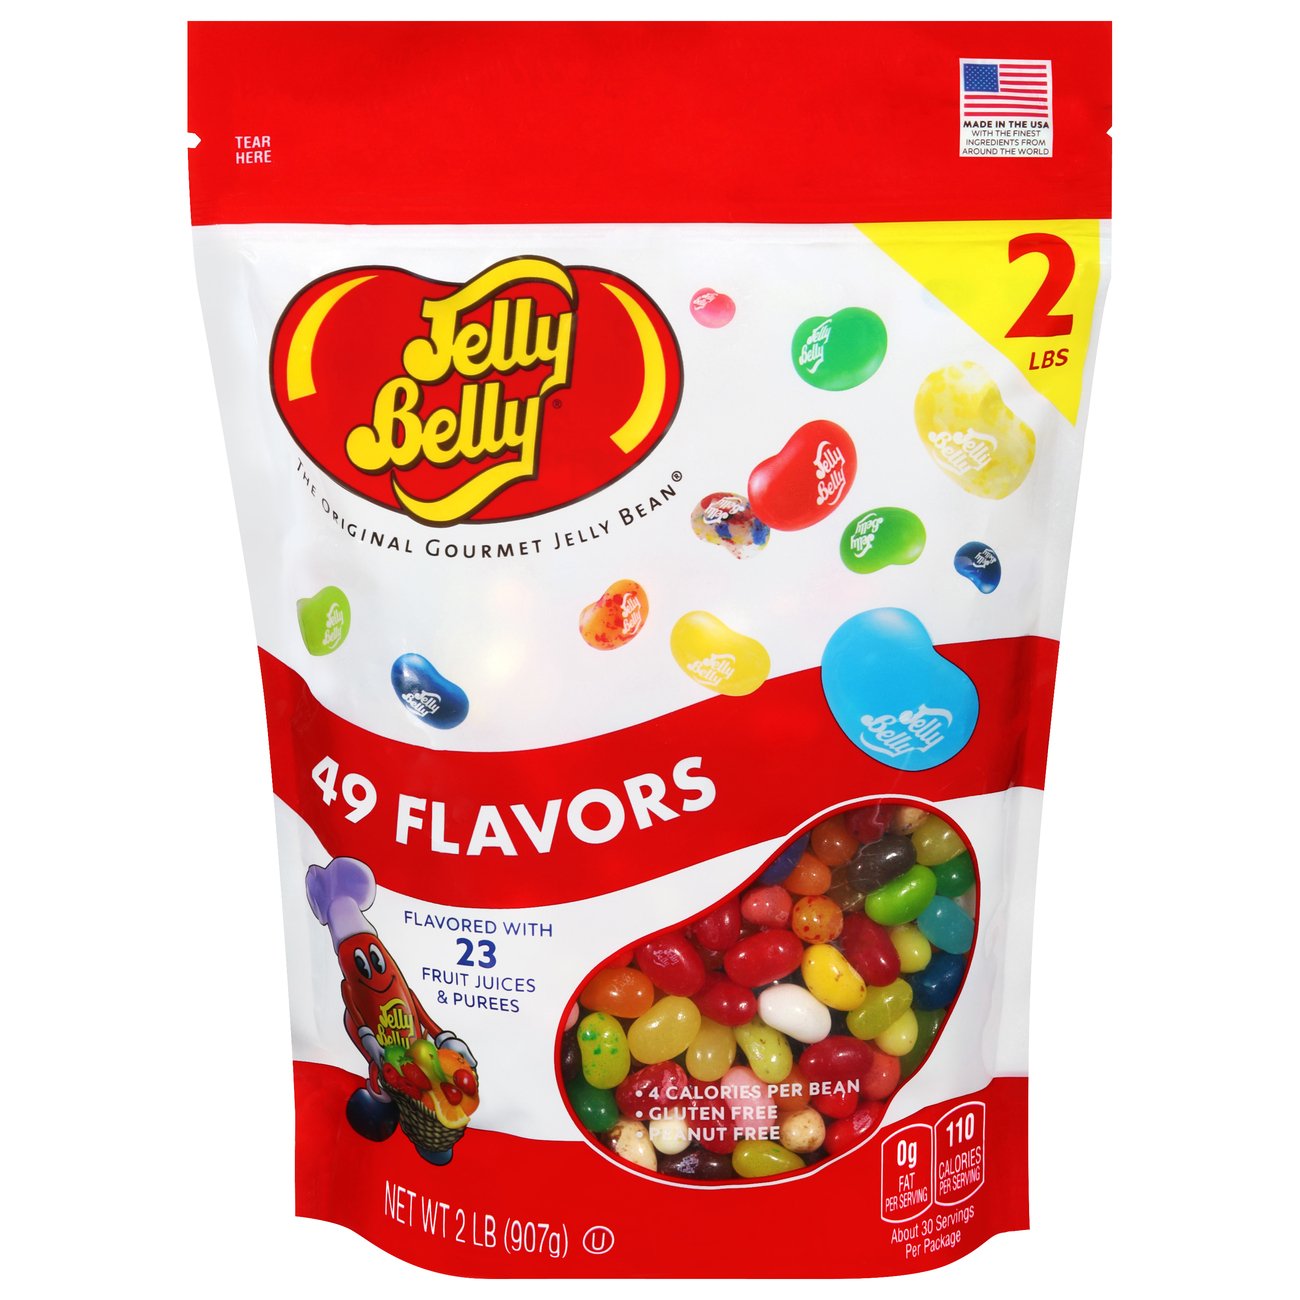 Jelly Belly 49 Flavors Gourmet Jelly Bean - Shop Jelly Belly 49 Flavors  Gourmet Jelly Bean - Shop Jelly Belly 49 Flavors Gourmet Jelly Bean - Shop  Jelly Belly 49 Flavors Gourmet